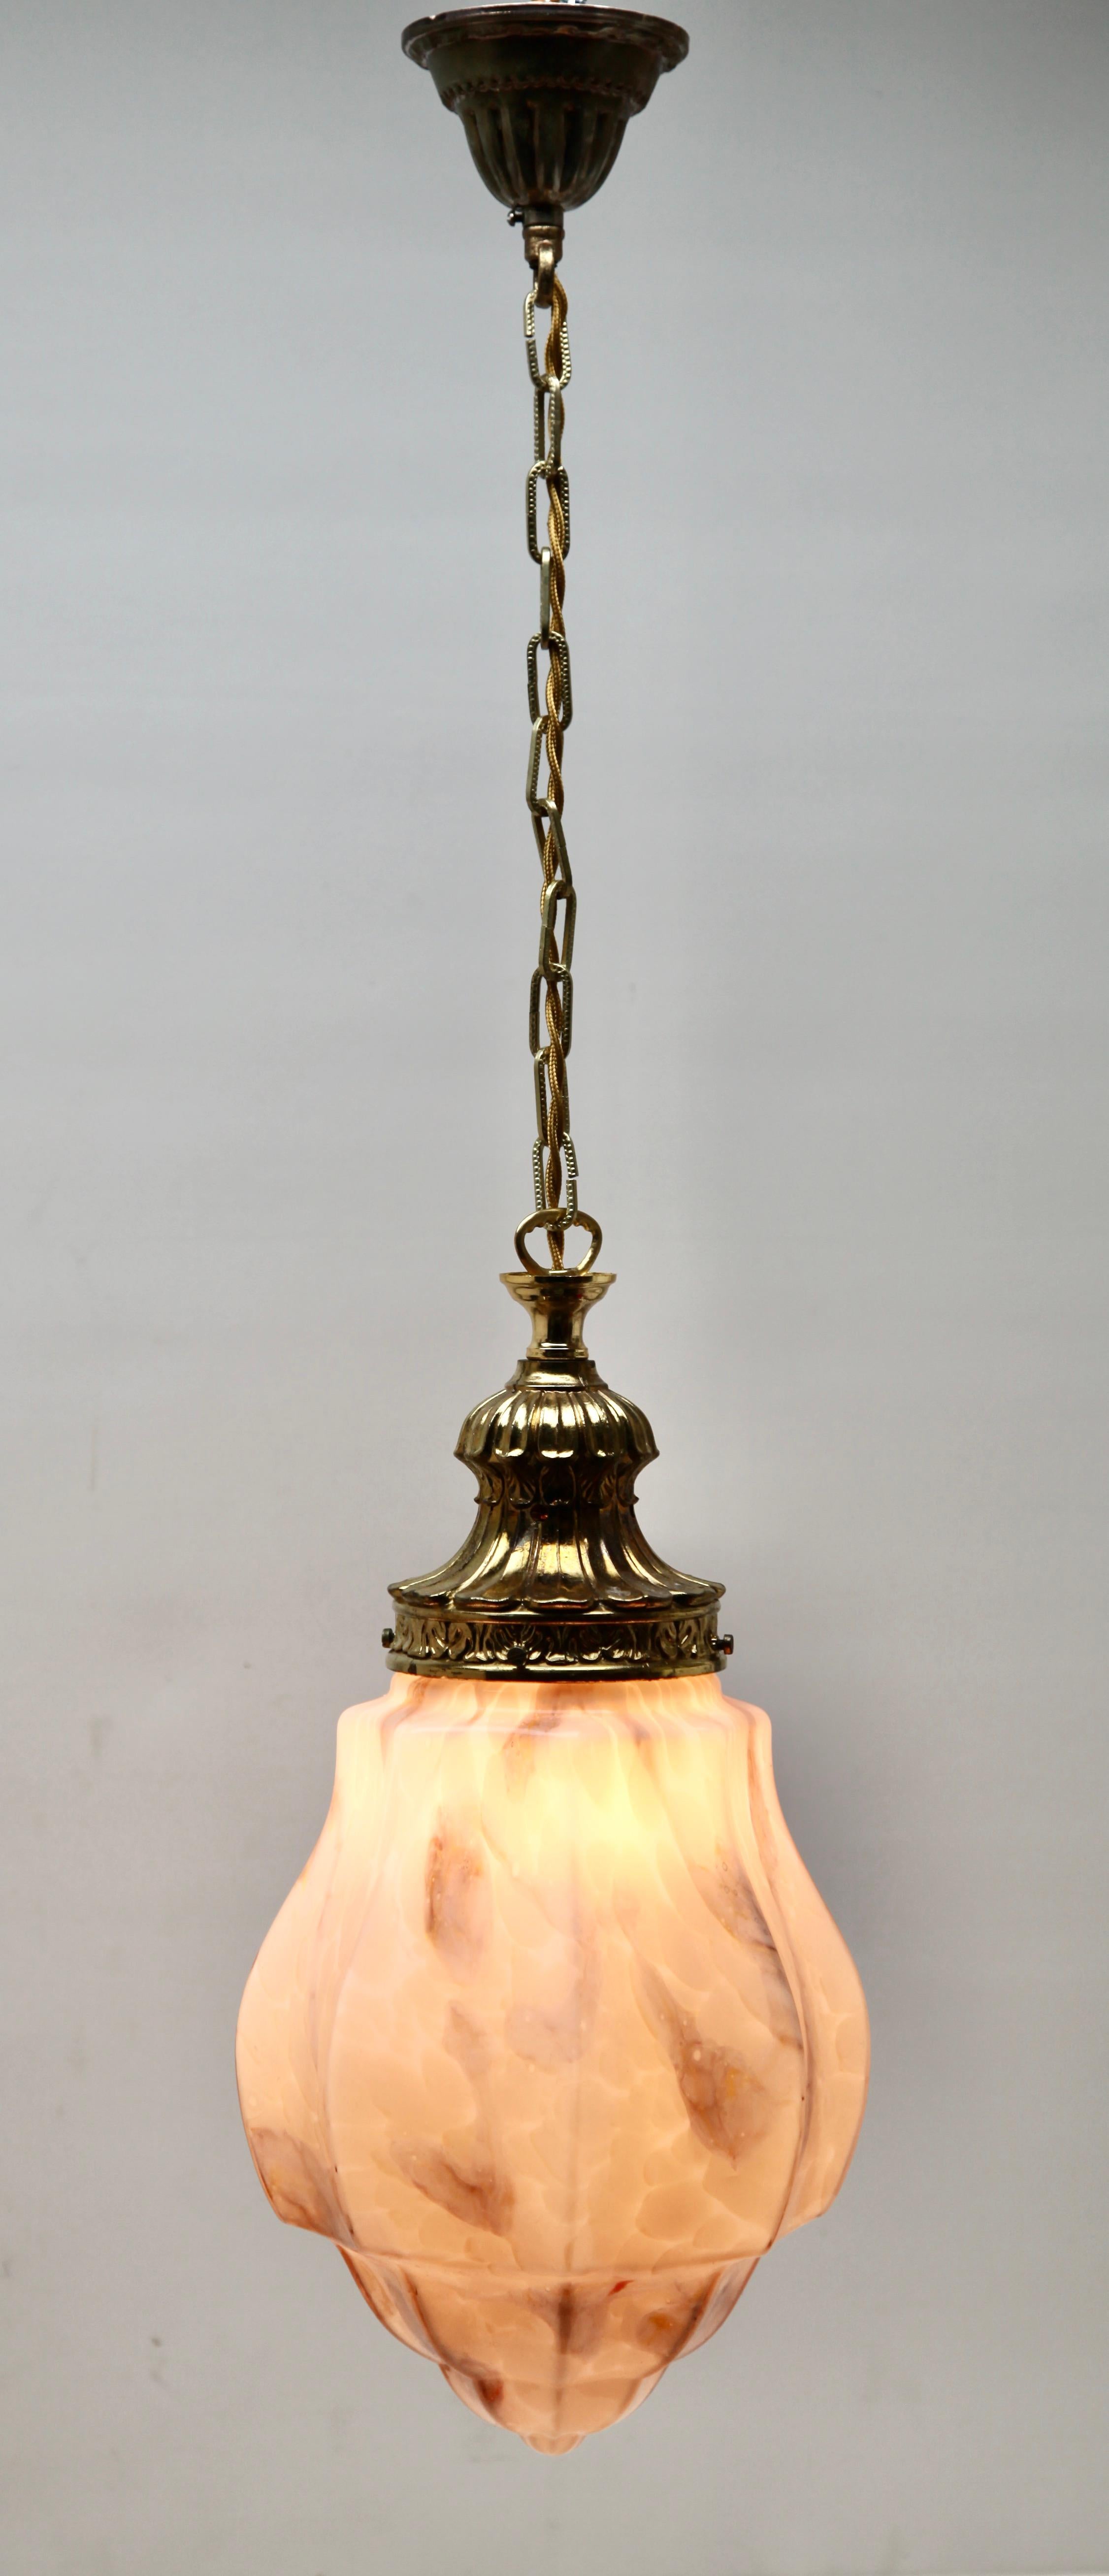 Art Deco Scailmont Pendant Lamp with a Opaline Shade and Brass Fittings, 1930s, Belgium